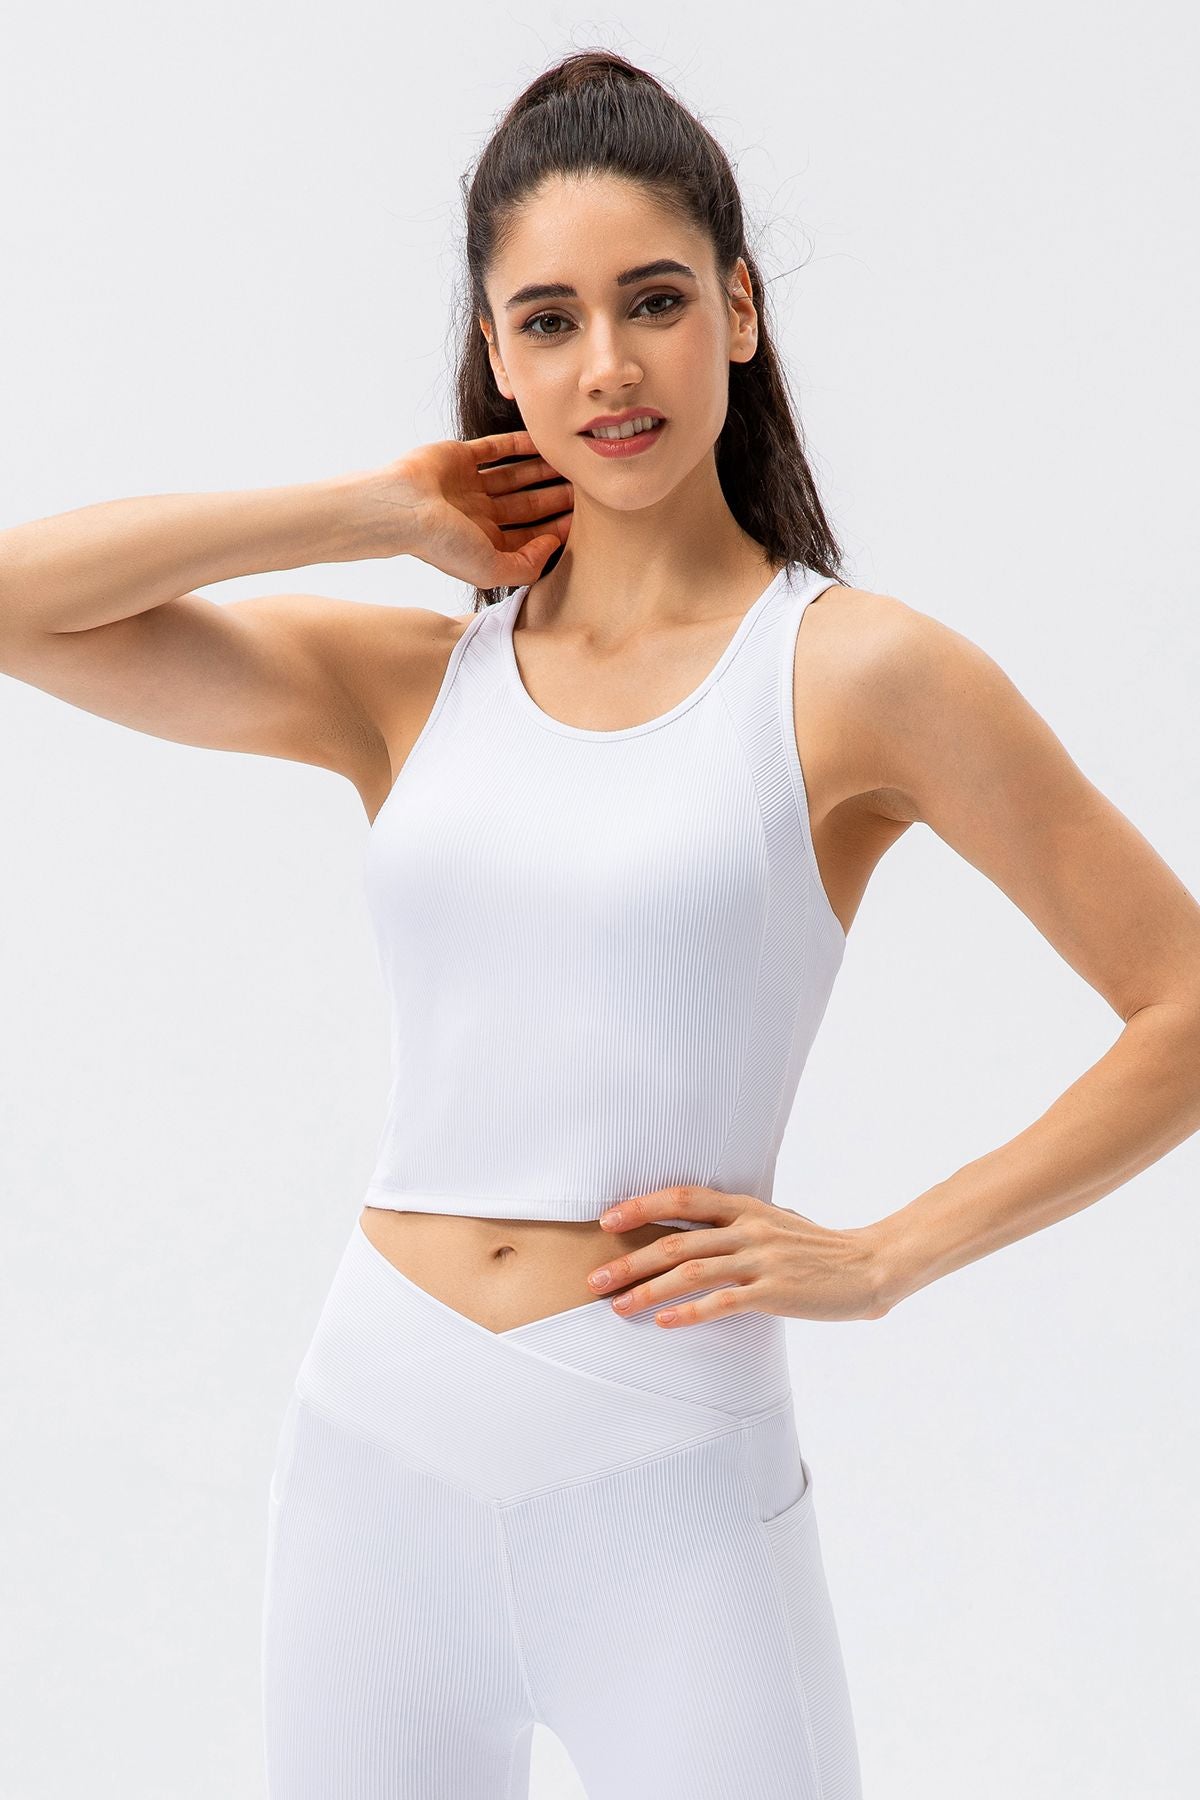 Womens Sports Bra Top Ribbed Tank White Crop Top Size Small No Tag